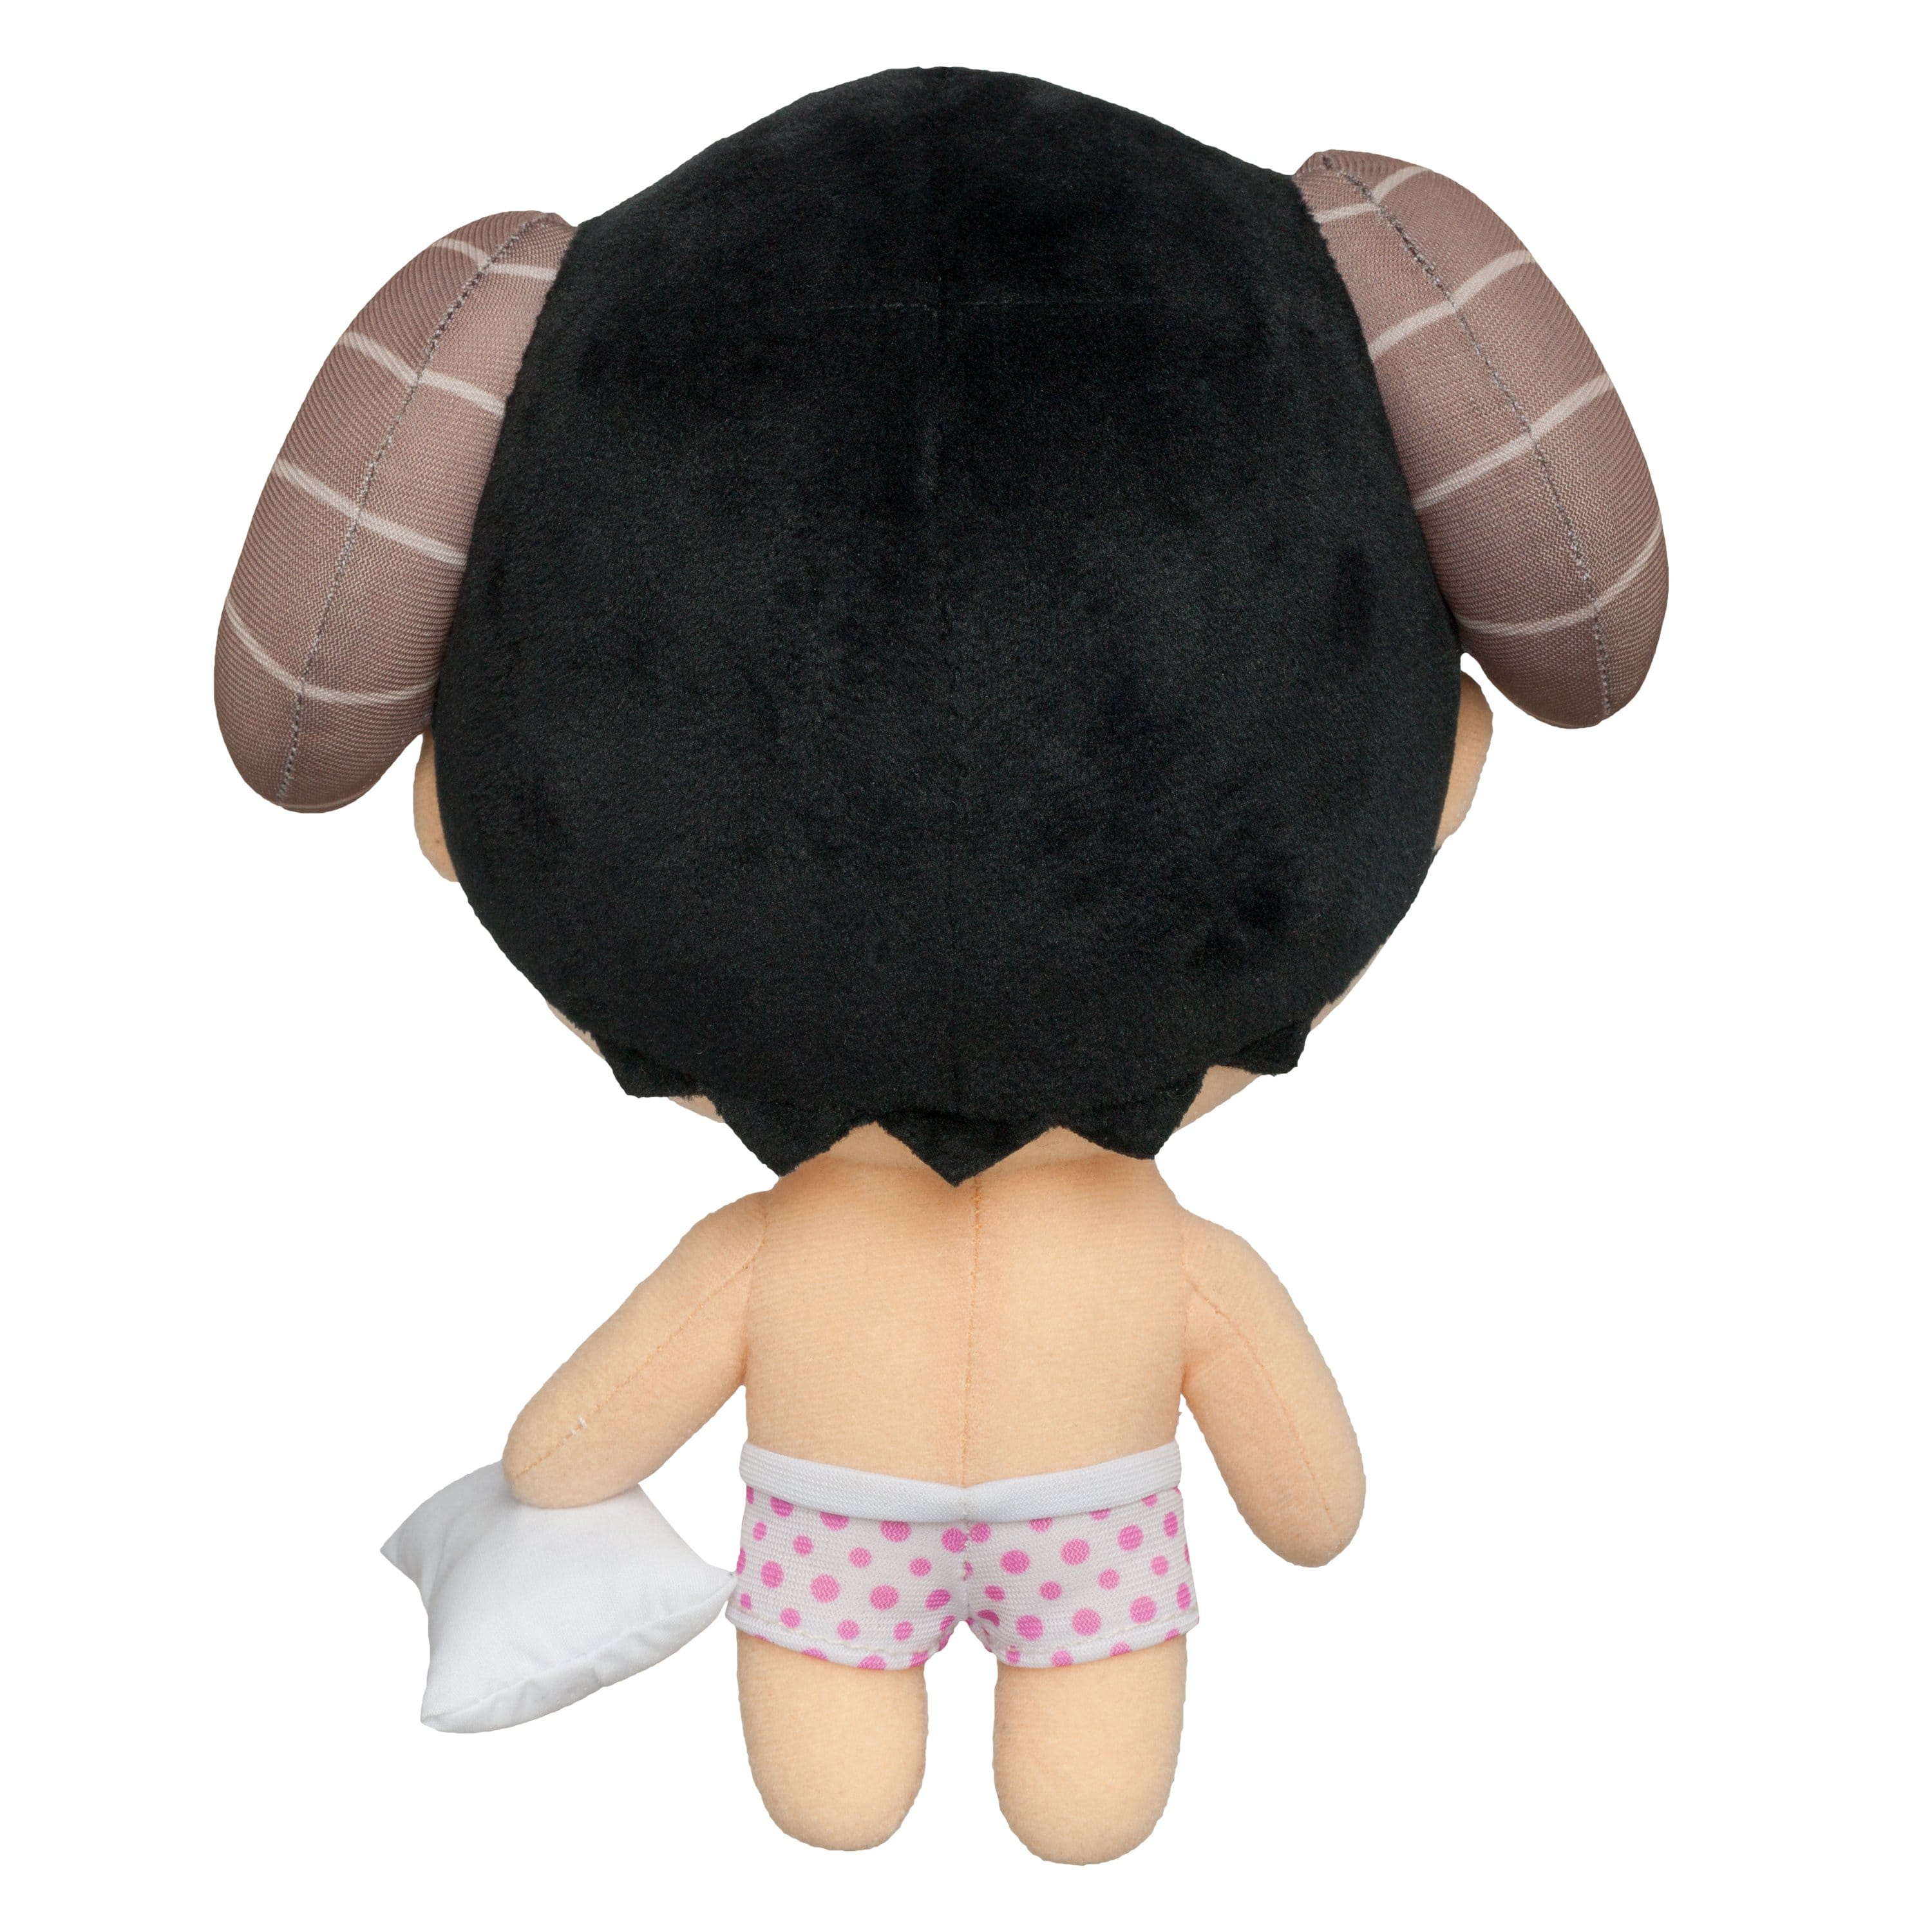 Catherine - 11" Vincent Brooks Collector's Stuffed Plush Toy Back View